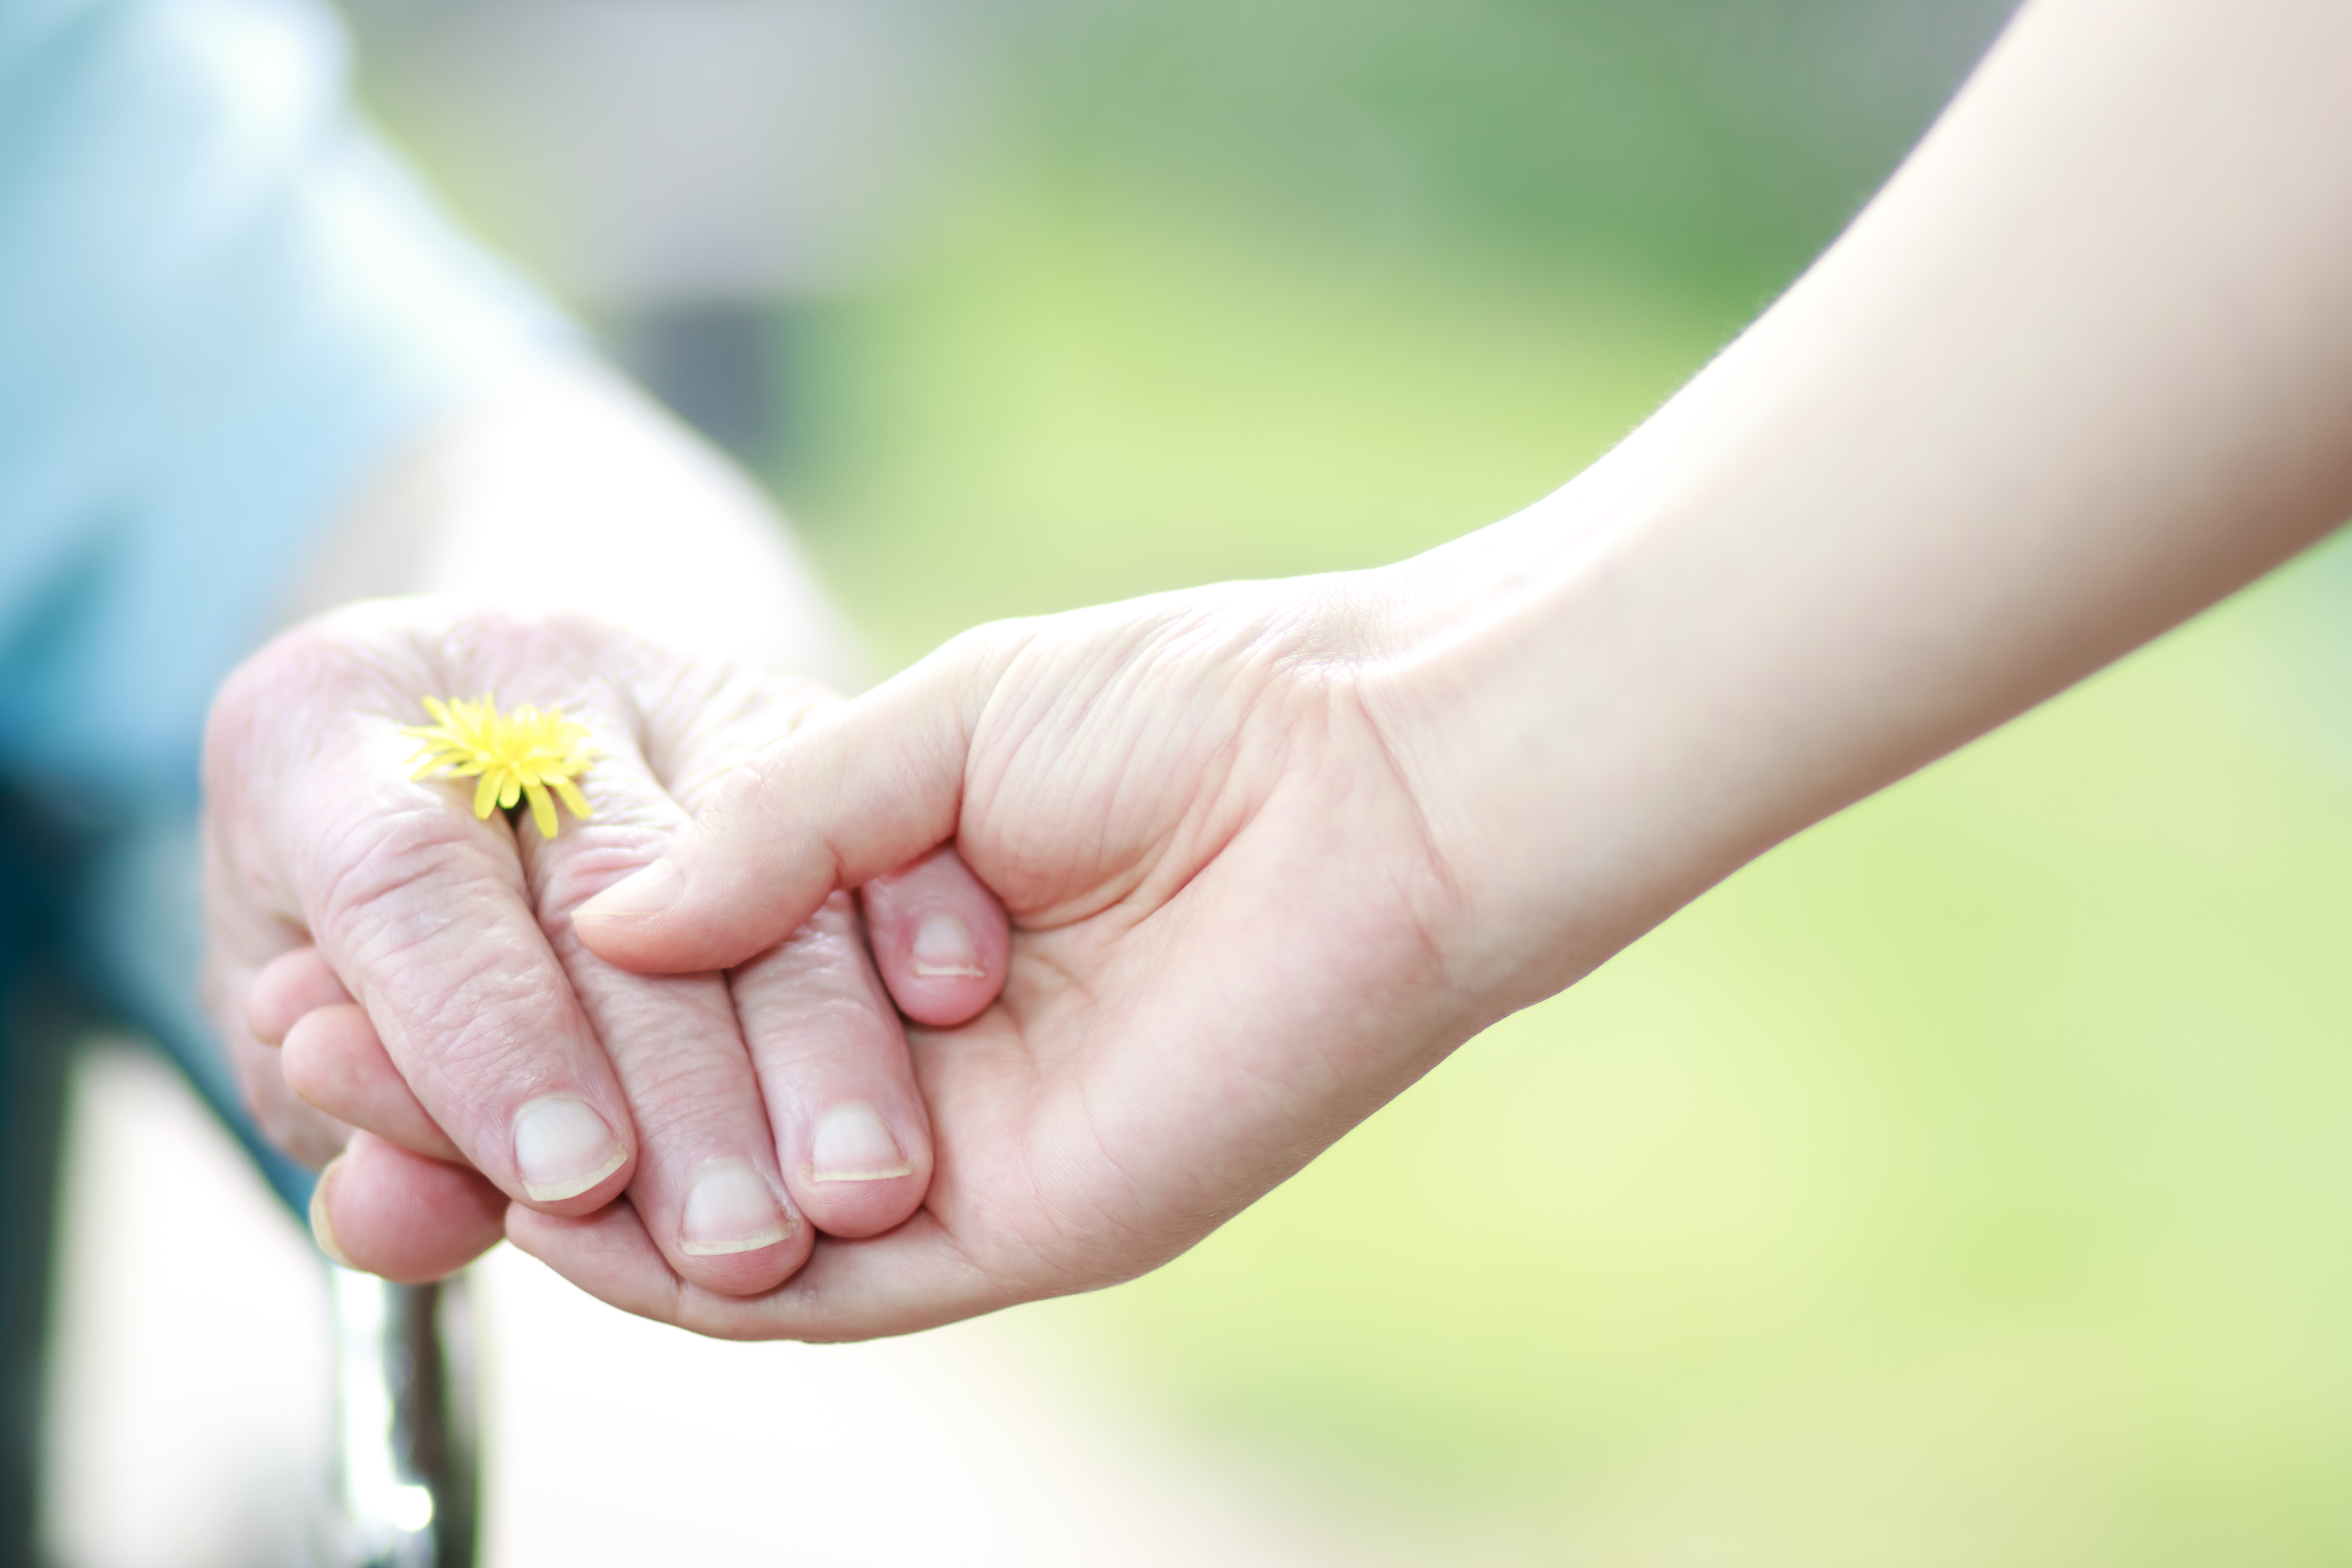 Young and senior hands holding hands with a dandelion